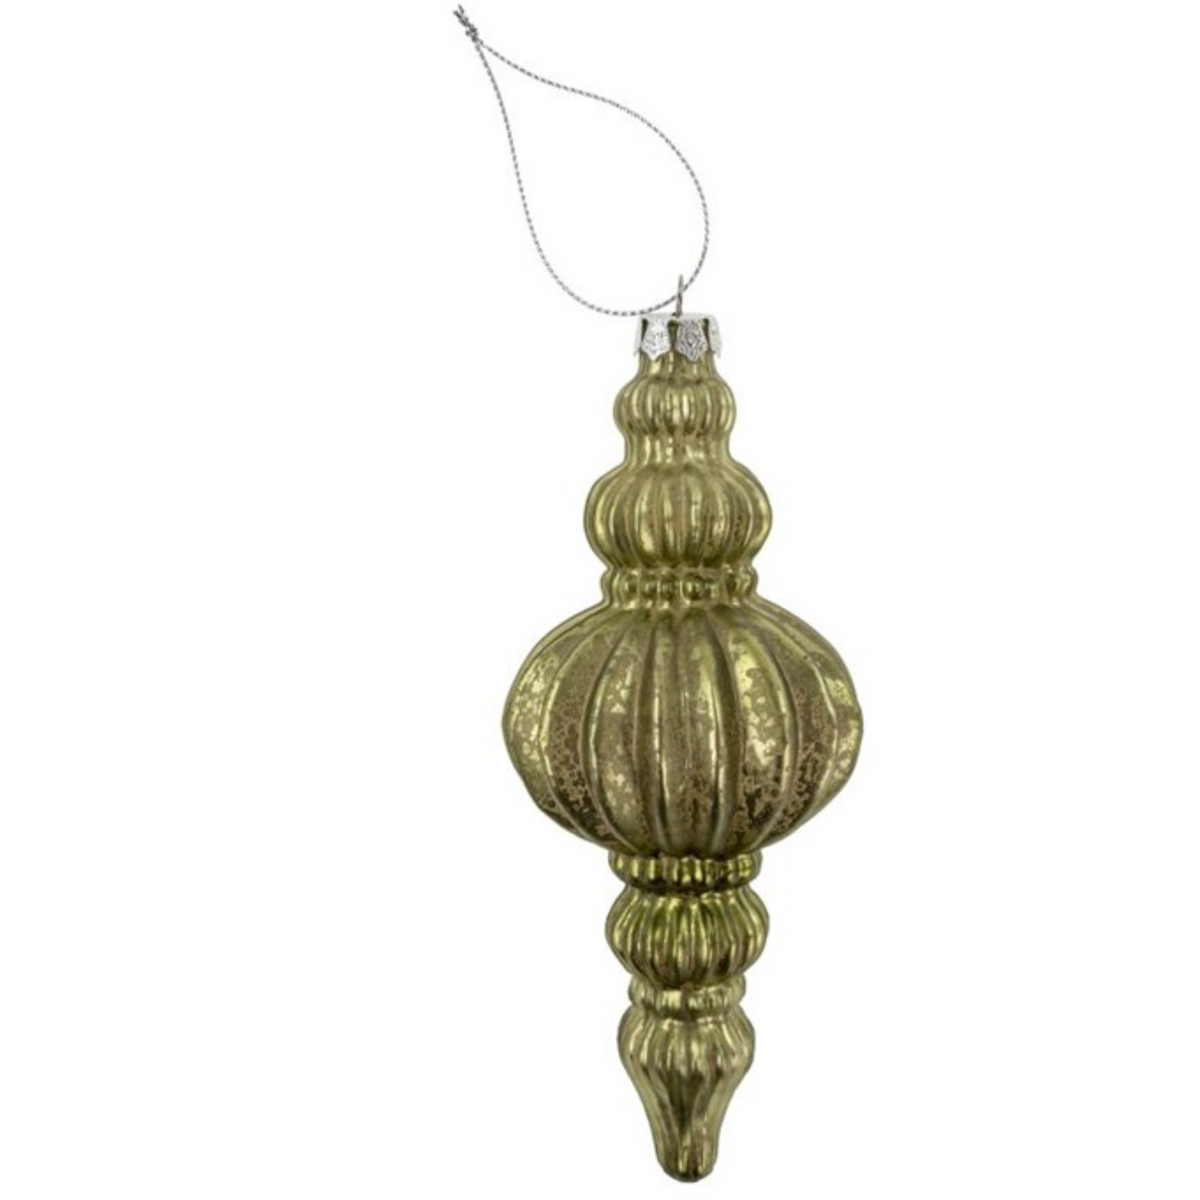 Belle Spindle Glass Ornament, Light Green